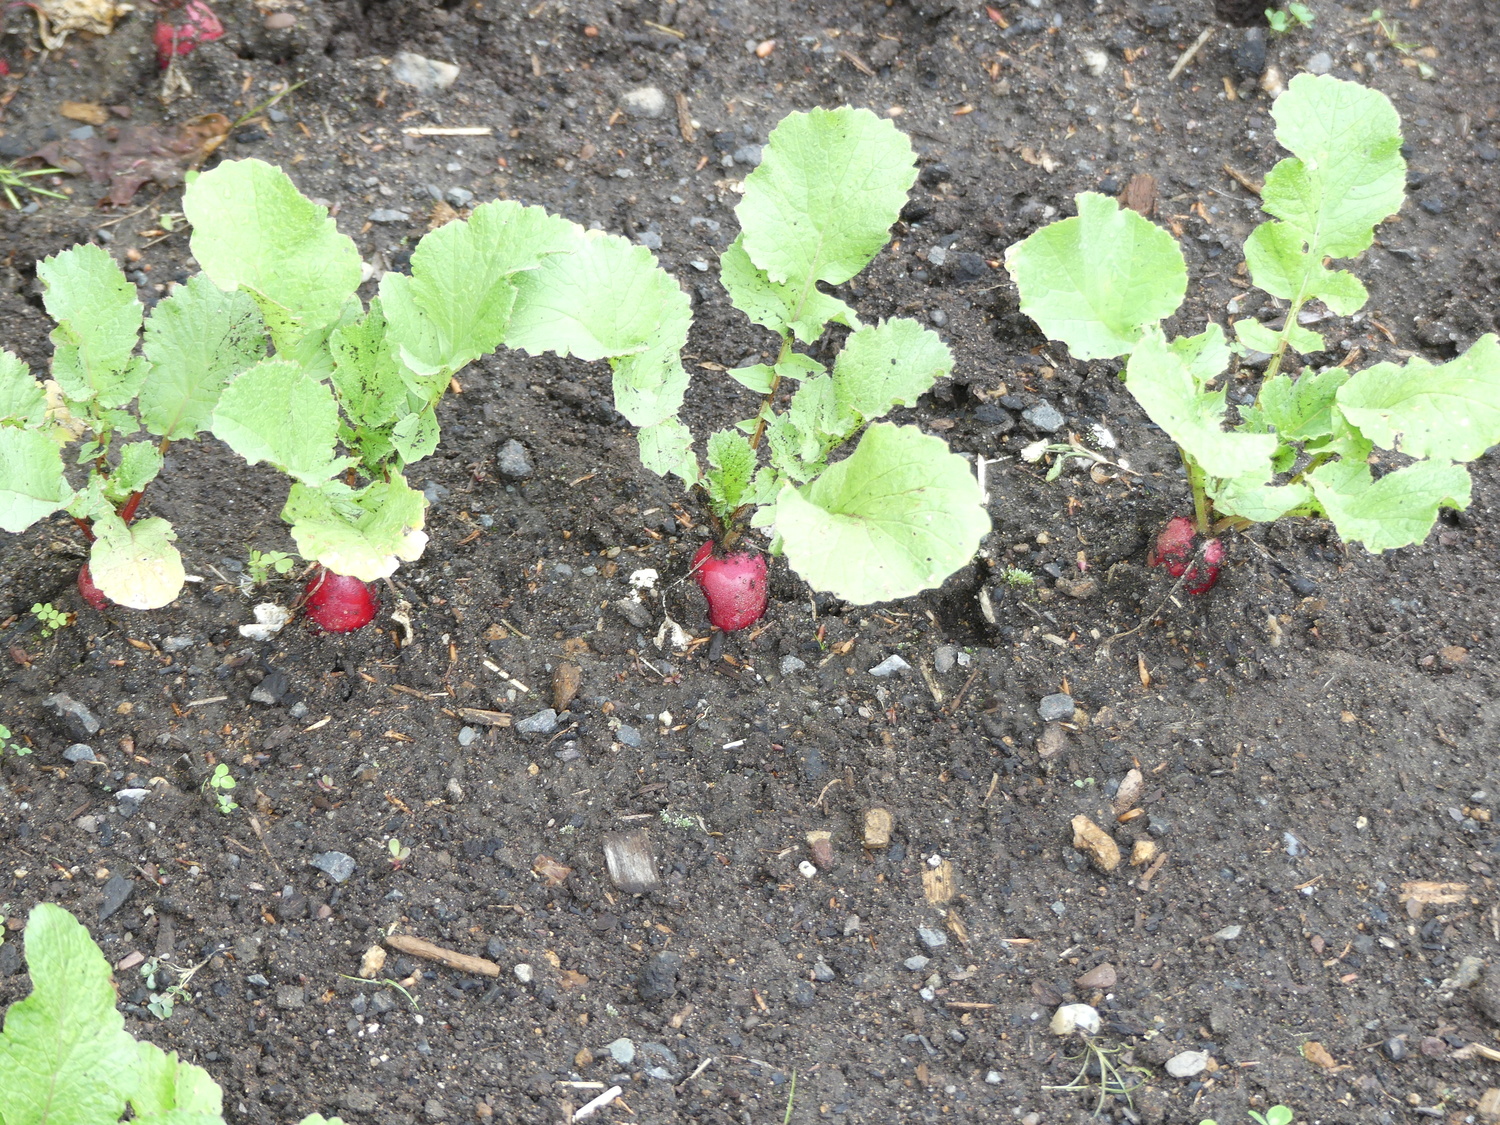 An early variety of radish, probably Cherry Belle. These were planted in early April and got to this harvestable size in about four weeks. Succession plantings can extend your early radish season well into May or early June. ANDREW MESSINGER